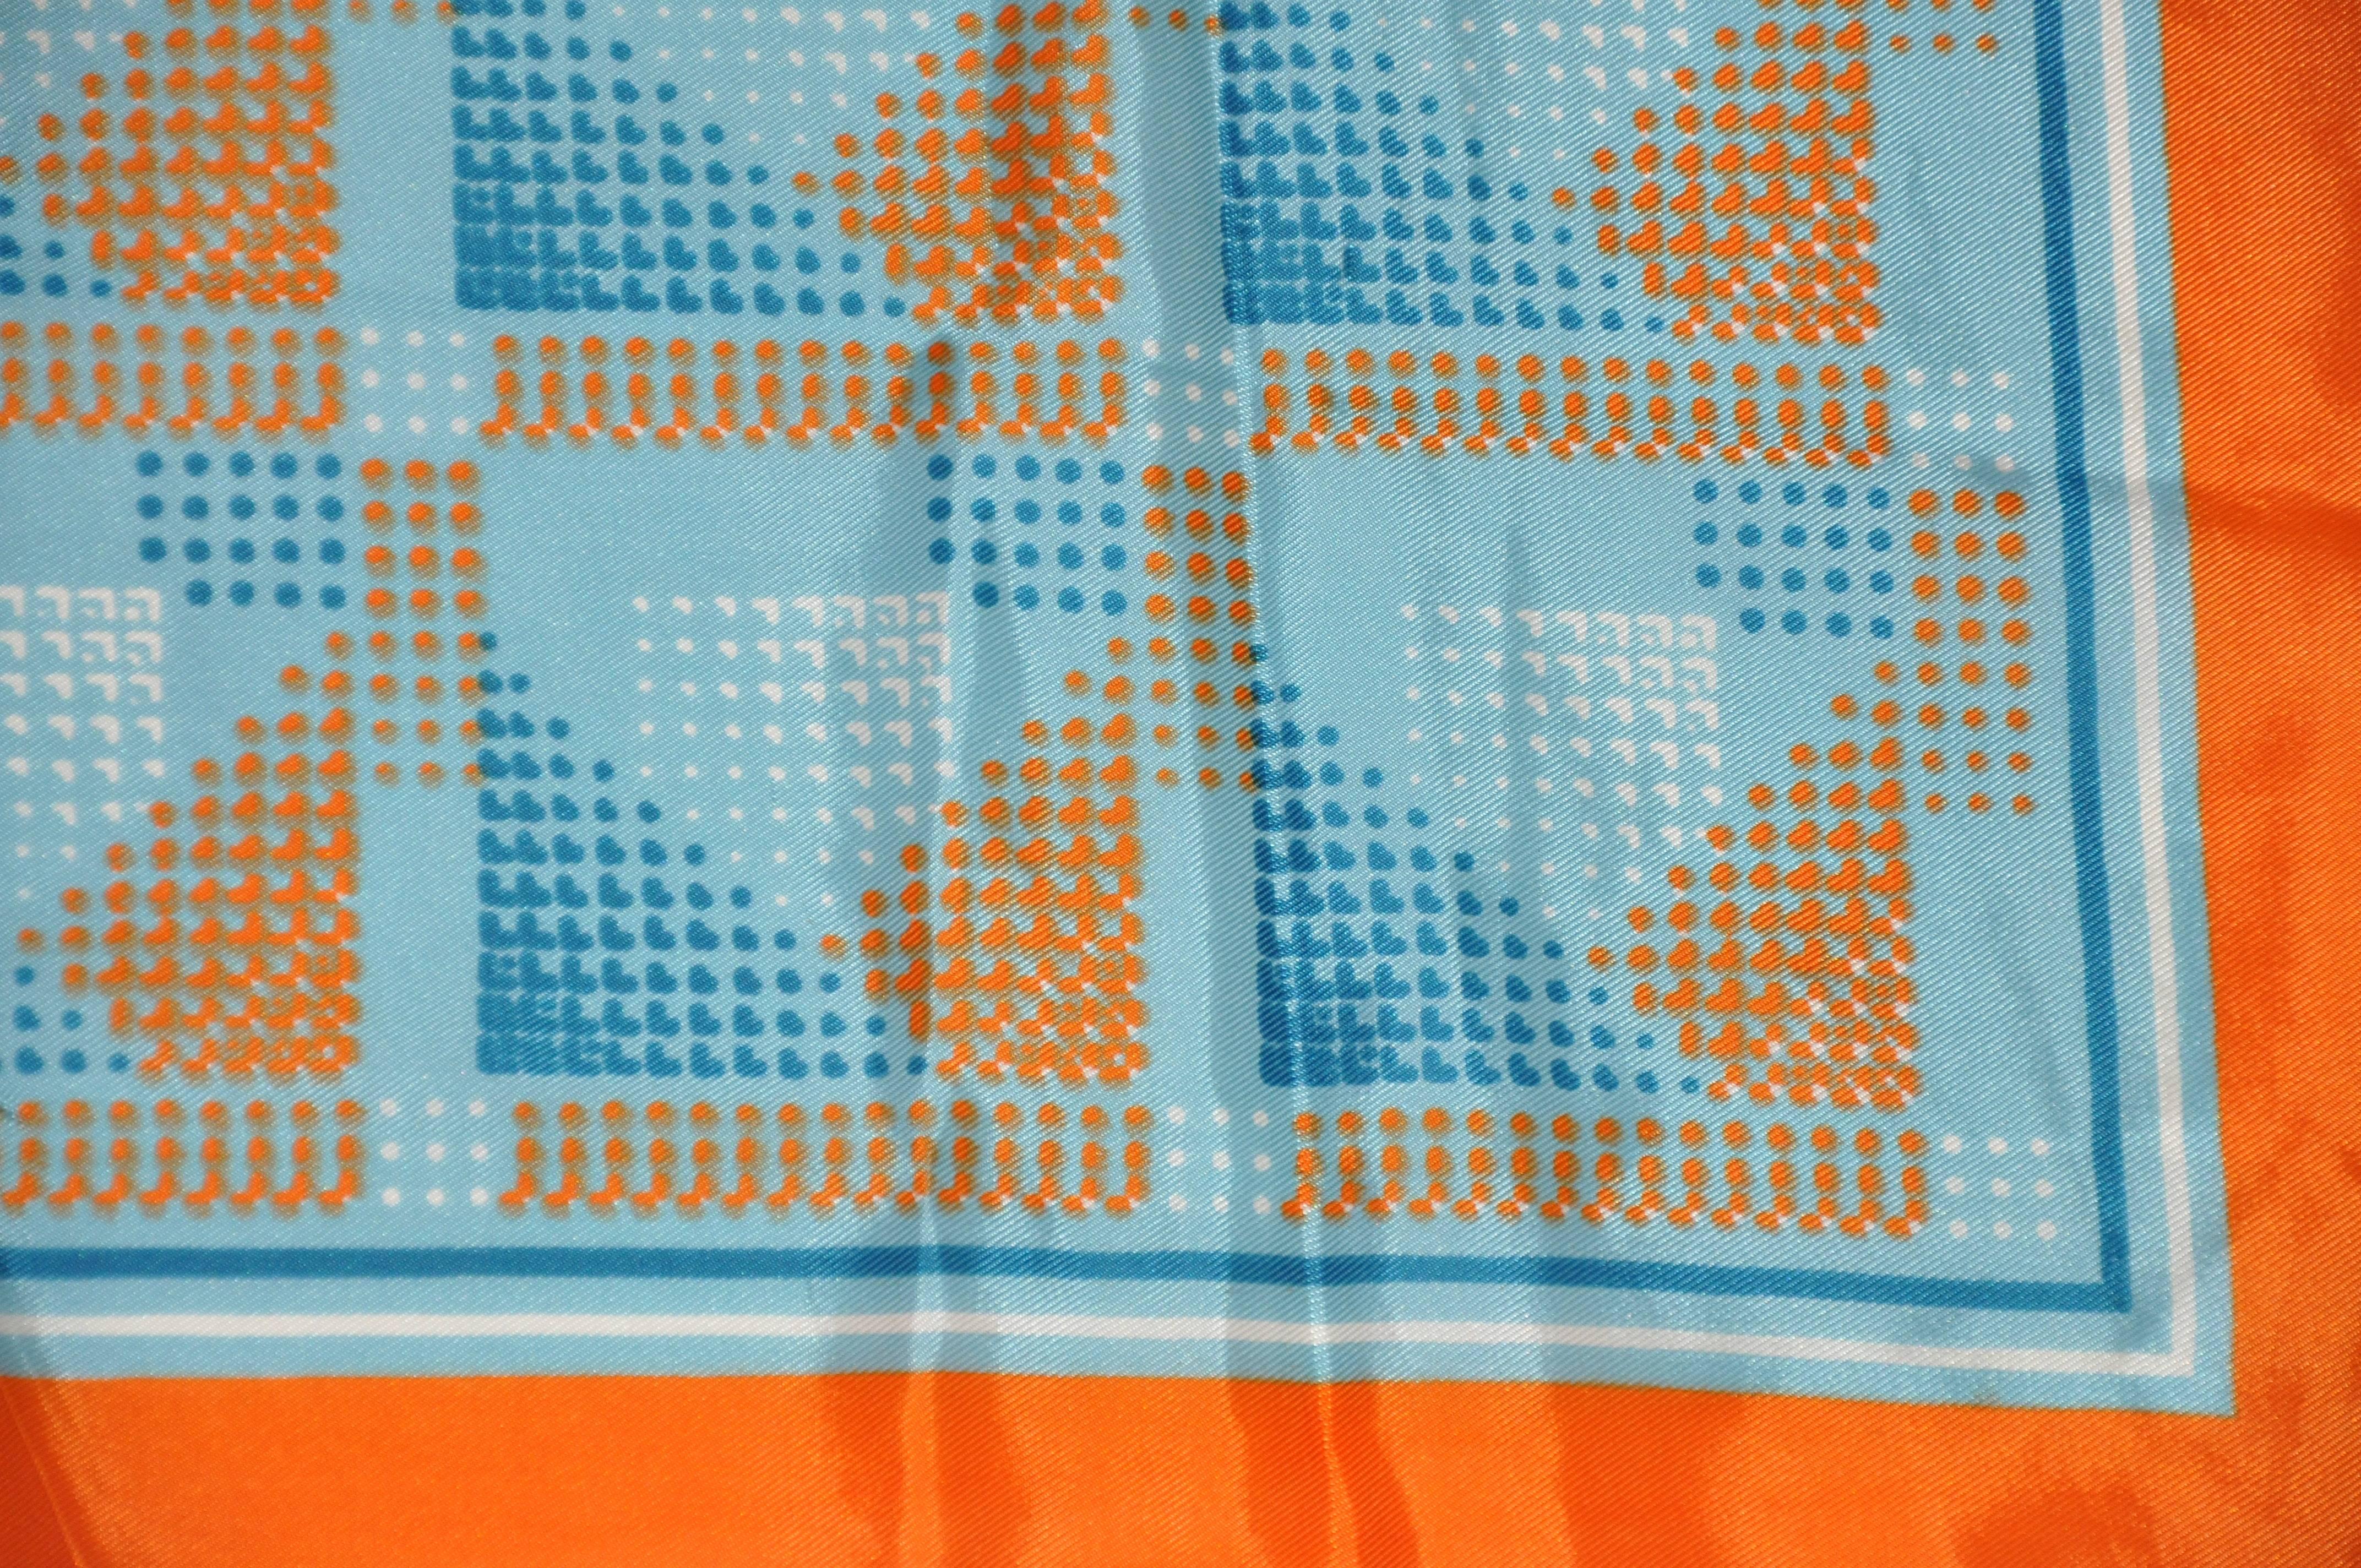        Wonderfully bold, this bold tangerine border with shades of blues & oranges abstract scarf measures 26 inches by 26 inches. Made in acetate in Japan.